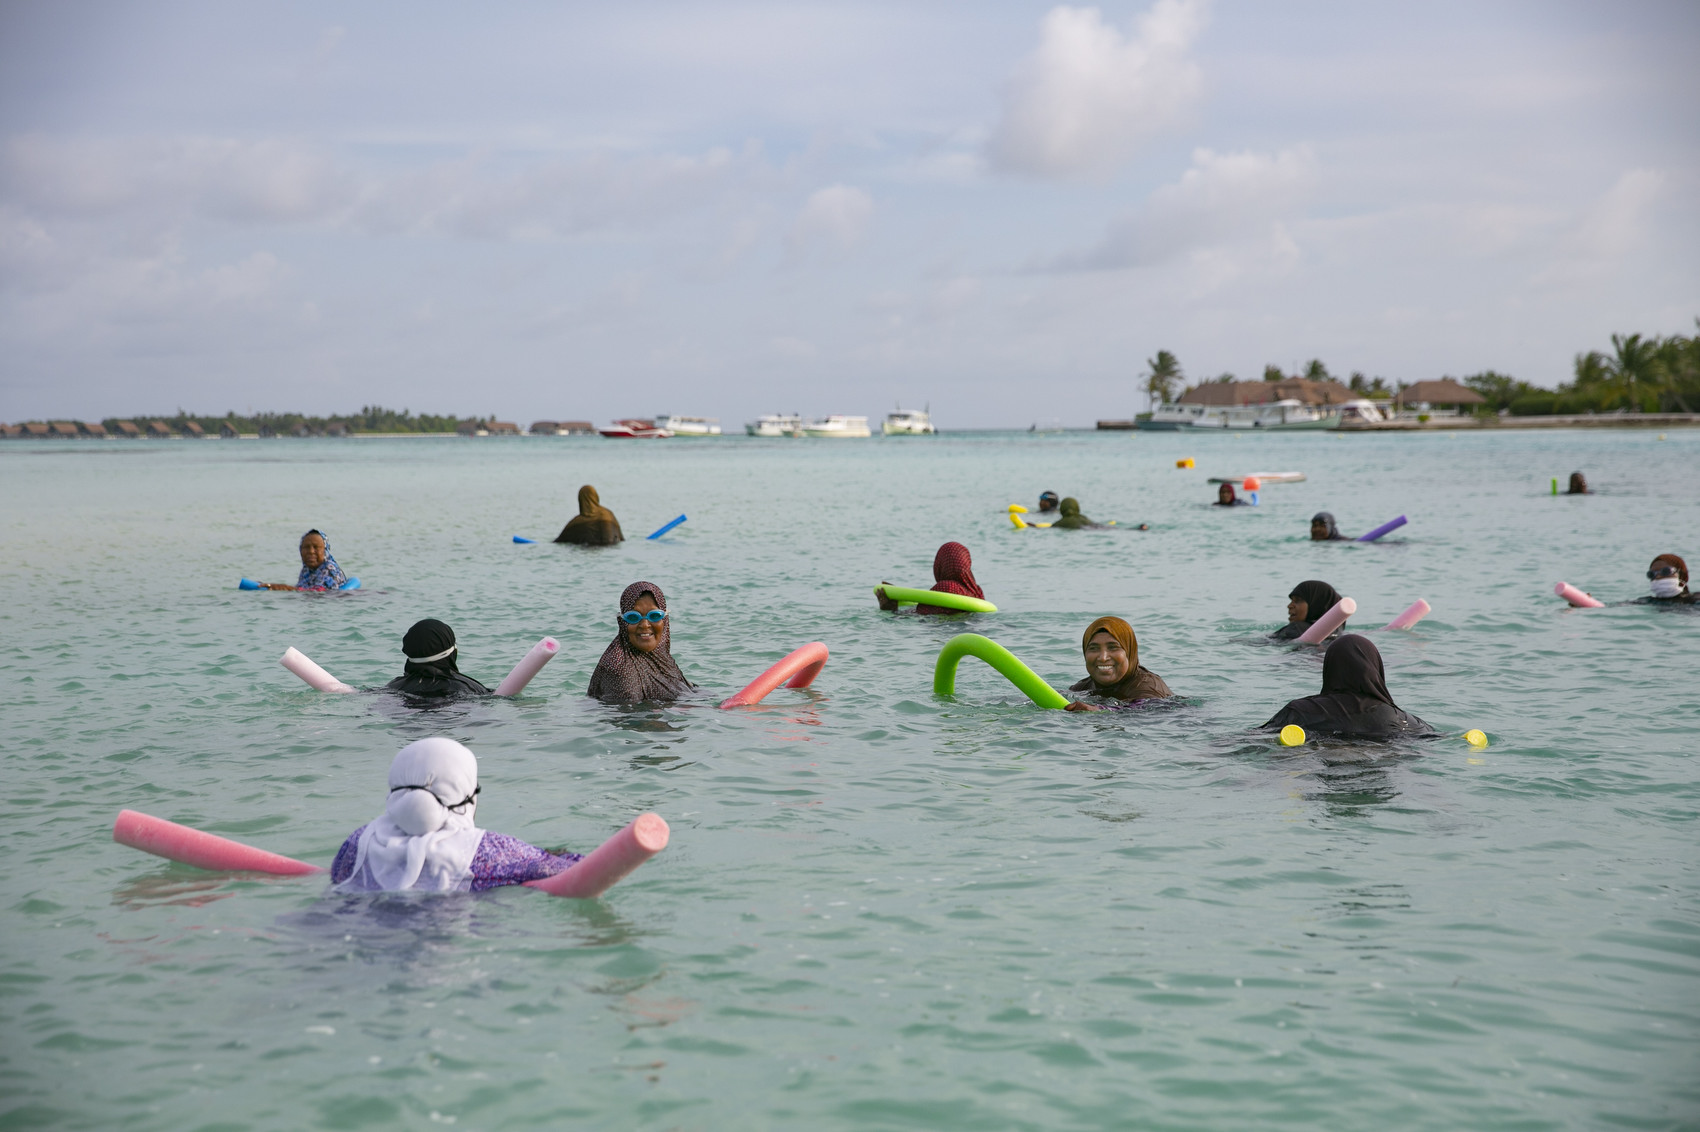 Local women swim in the ocean in Guraidhoo, Maldives. The Maldives is one of the world's lowest-lying countries; more than 80% of the Maldives’ land is less than one meter above sea levels, making it extremely vulnerable to climate change. At current global warming rates, 80% of the Maldives could be submerged by 2050.  At the recent UN General Assembly, when discussing the threat of climate change, Maldives President Ibrahim Mohamed Solih said “There is no guarantee of survival for any one nation in a world where the Maldives cease to exist.” (Photo by Allison Joyce/Getty Images)